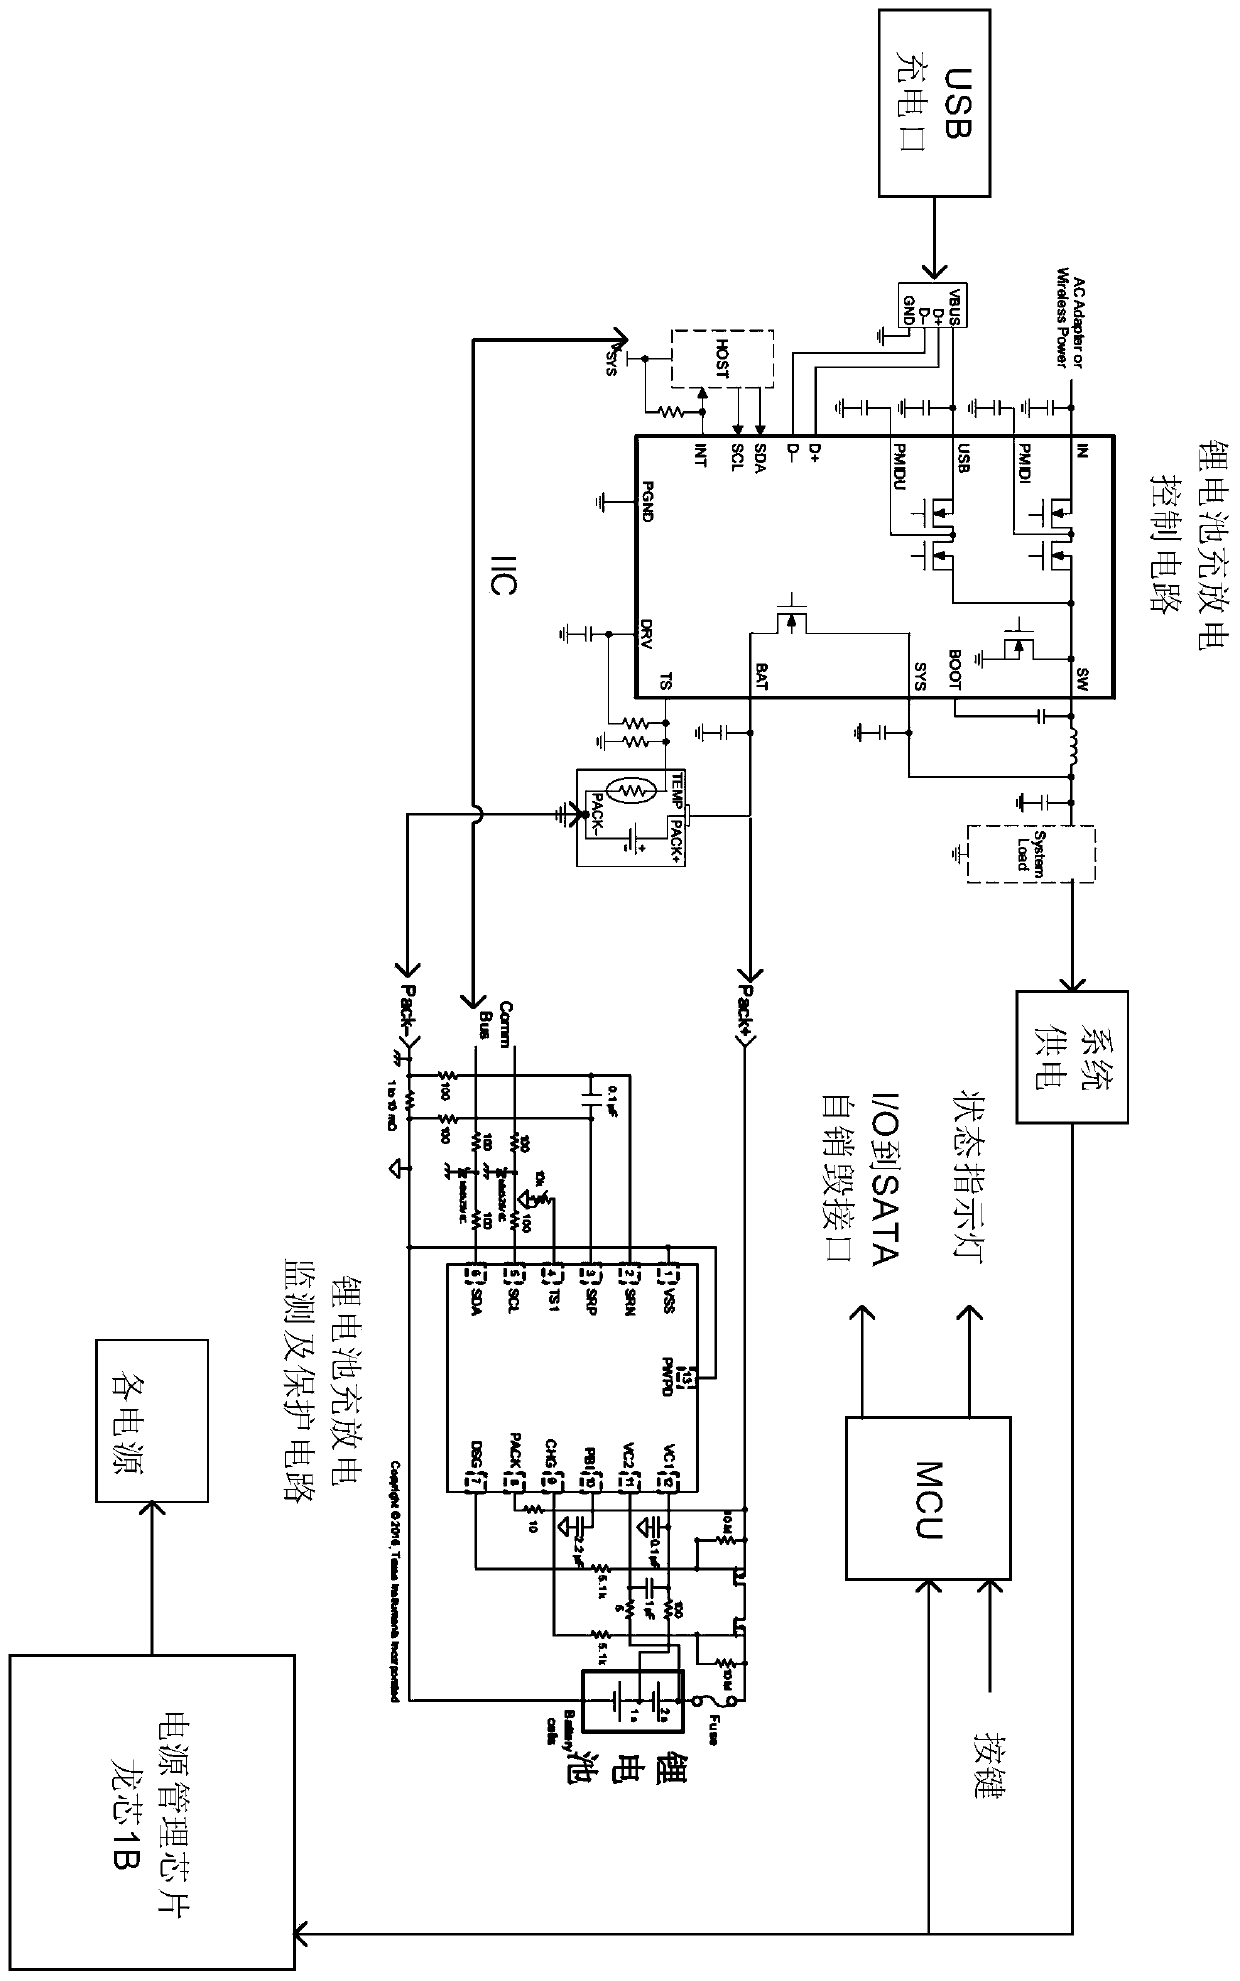 A portable terminal power supply management method based on a Loongson processor